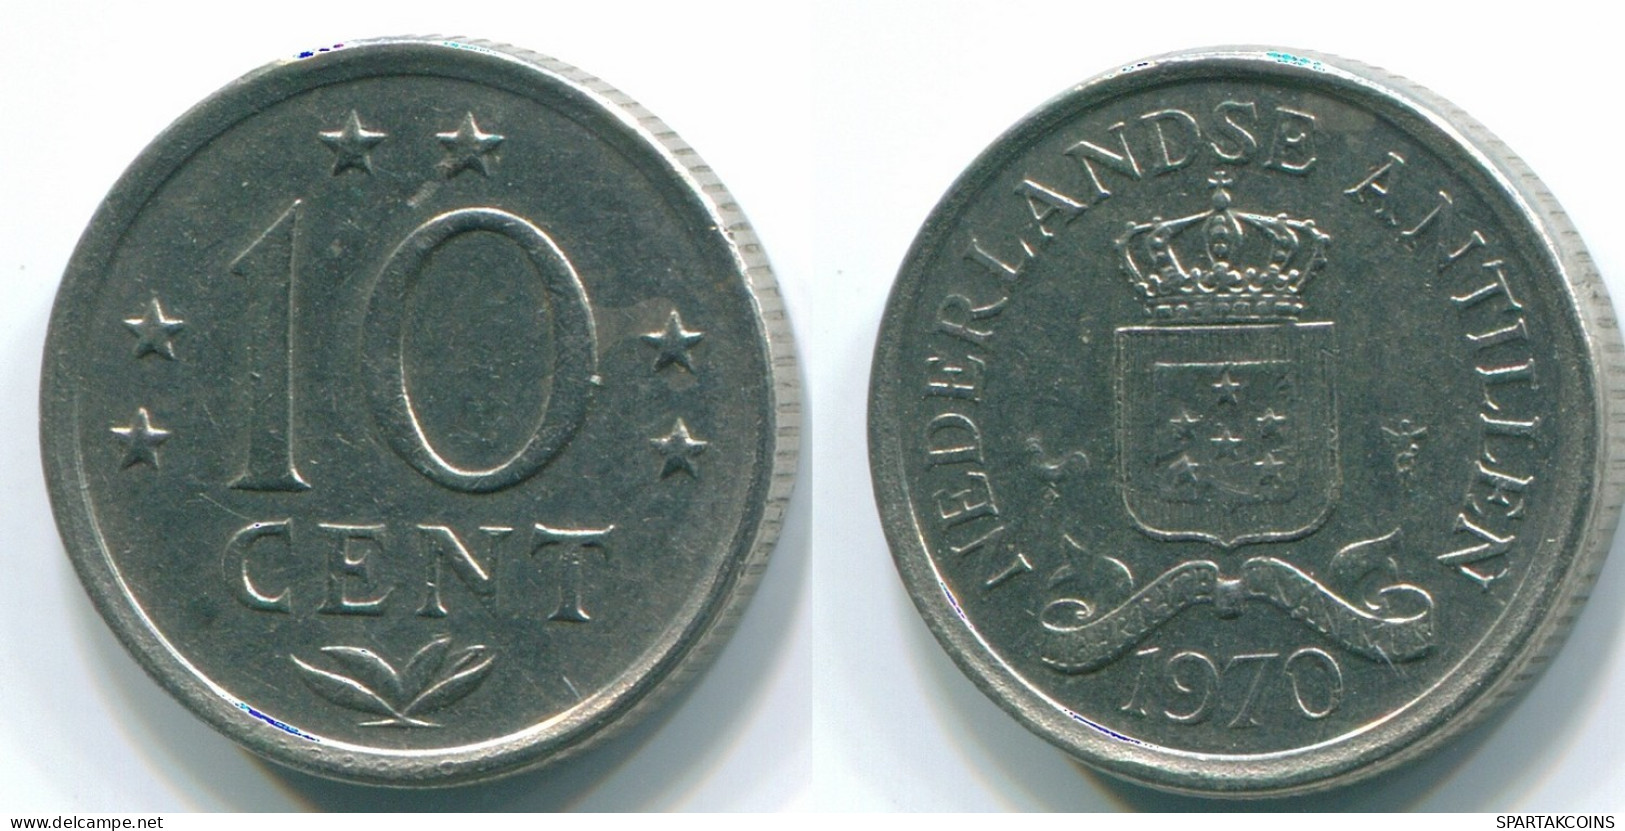 10 CENTS 1970 NETHERLANDS ANTILLES Nickel Colonial Coin #S13359.U.A - Antille Olandesi